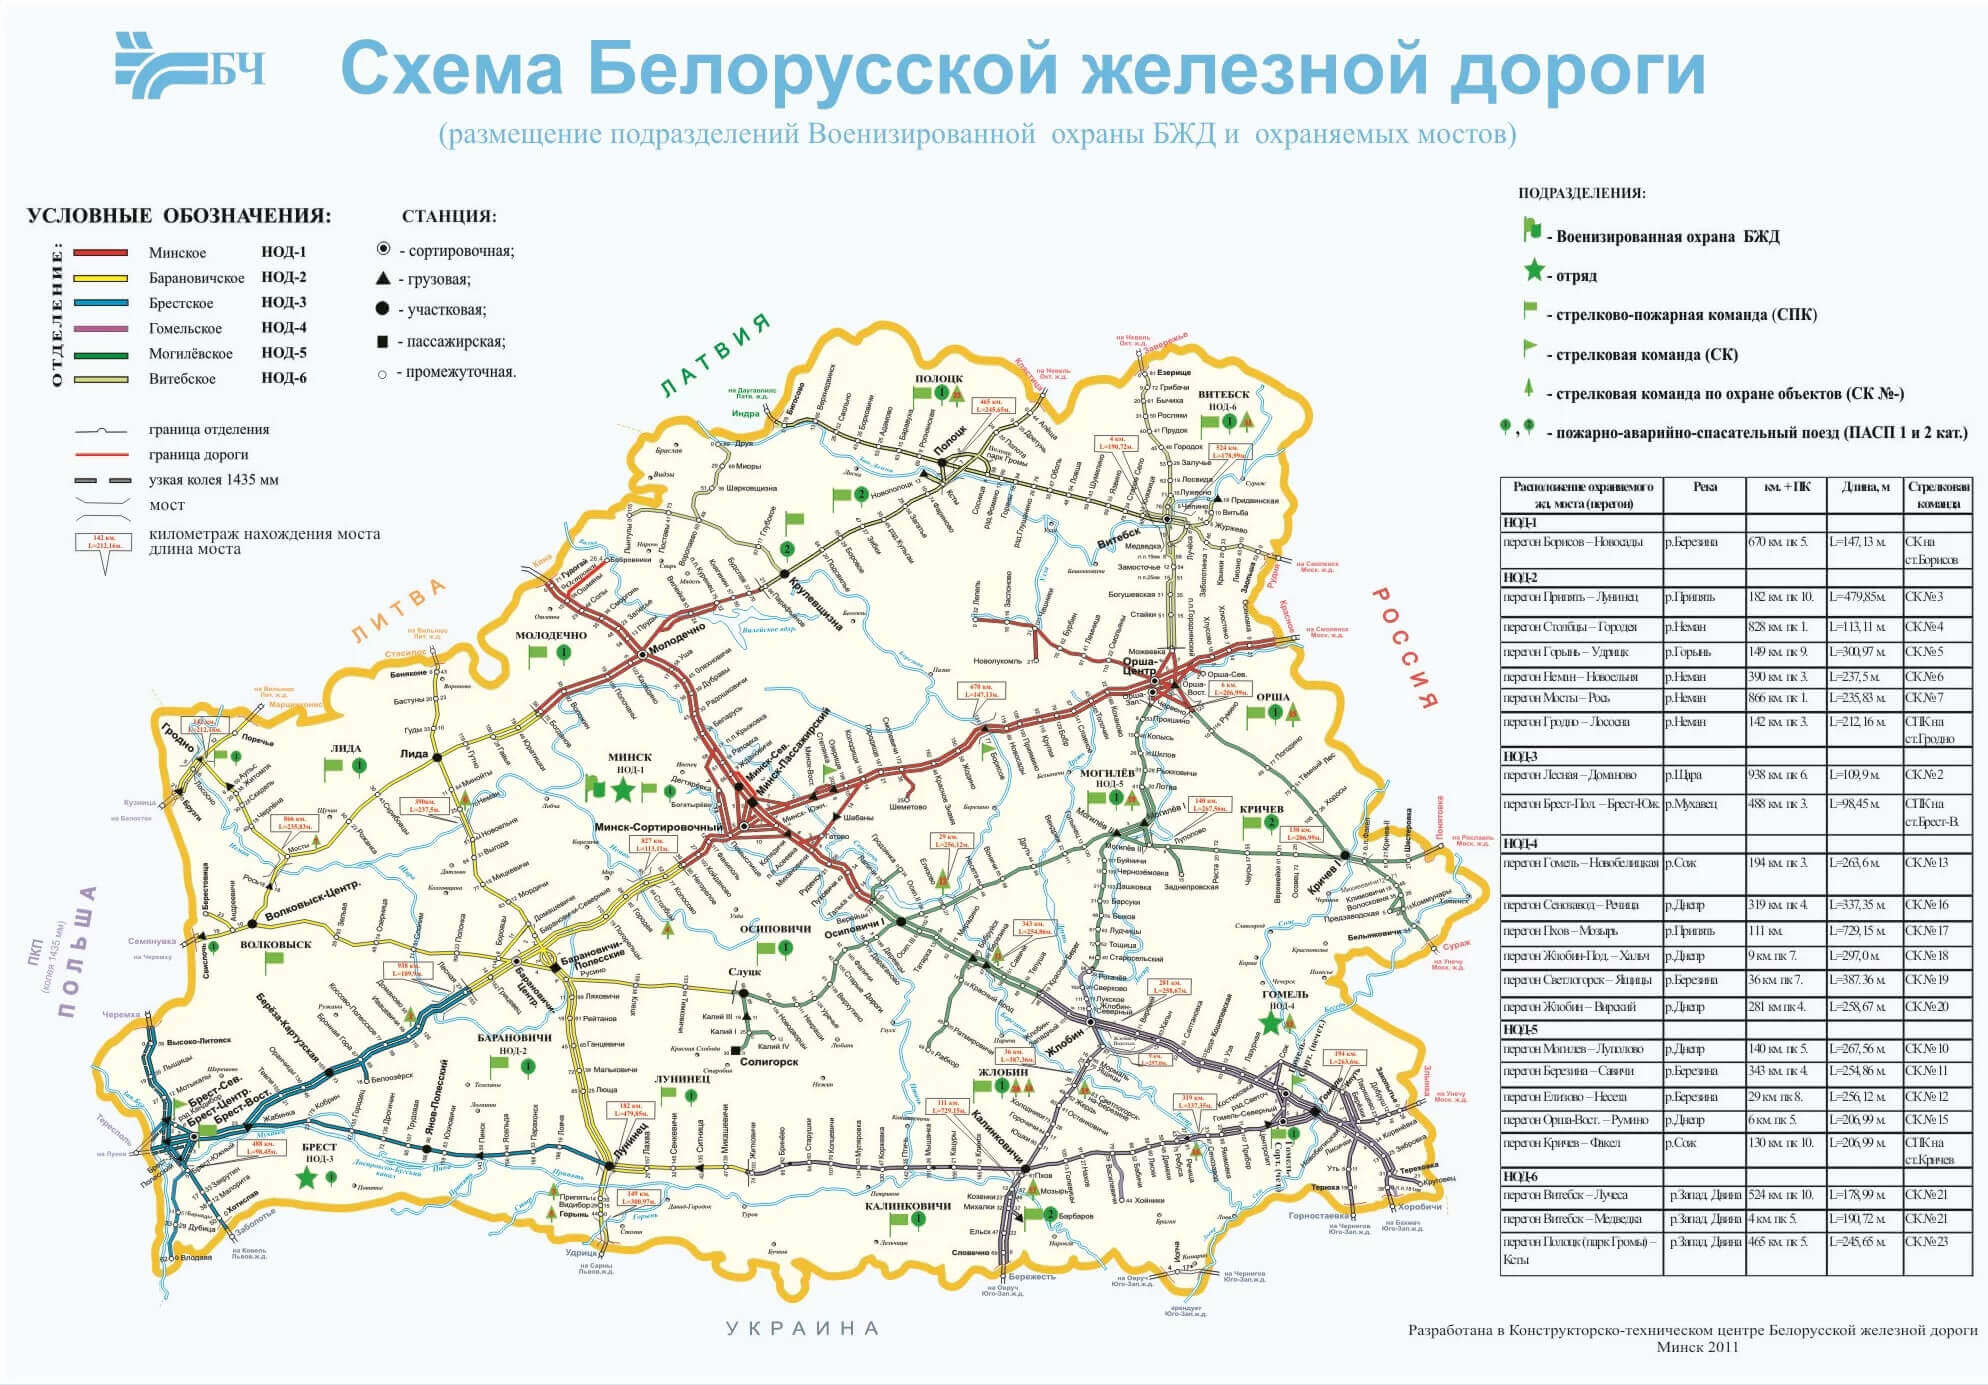 Scheme of the deployment of paramilitary security units of the Belarusian Railway and guarded bridges